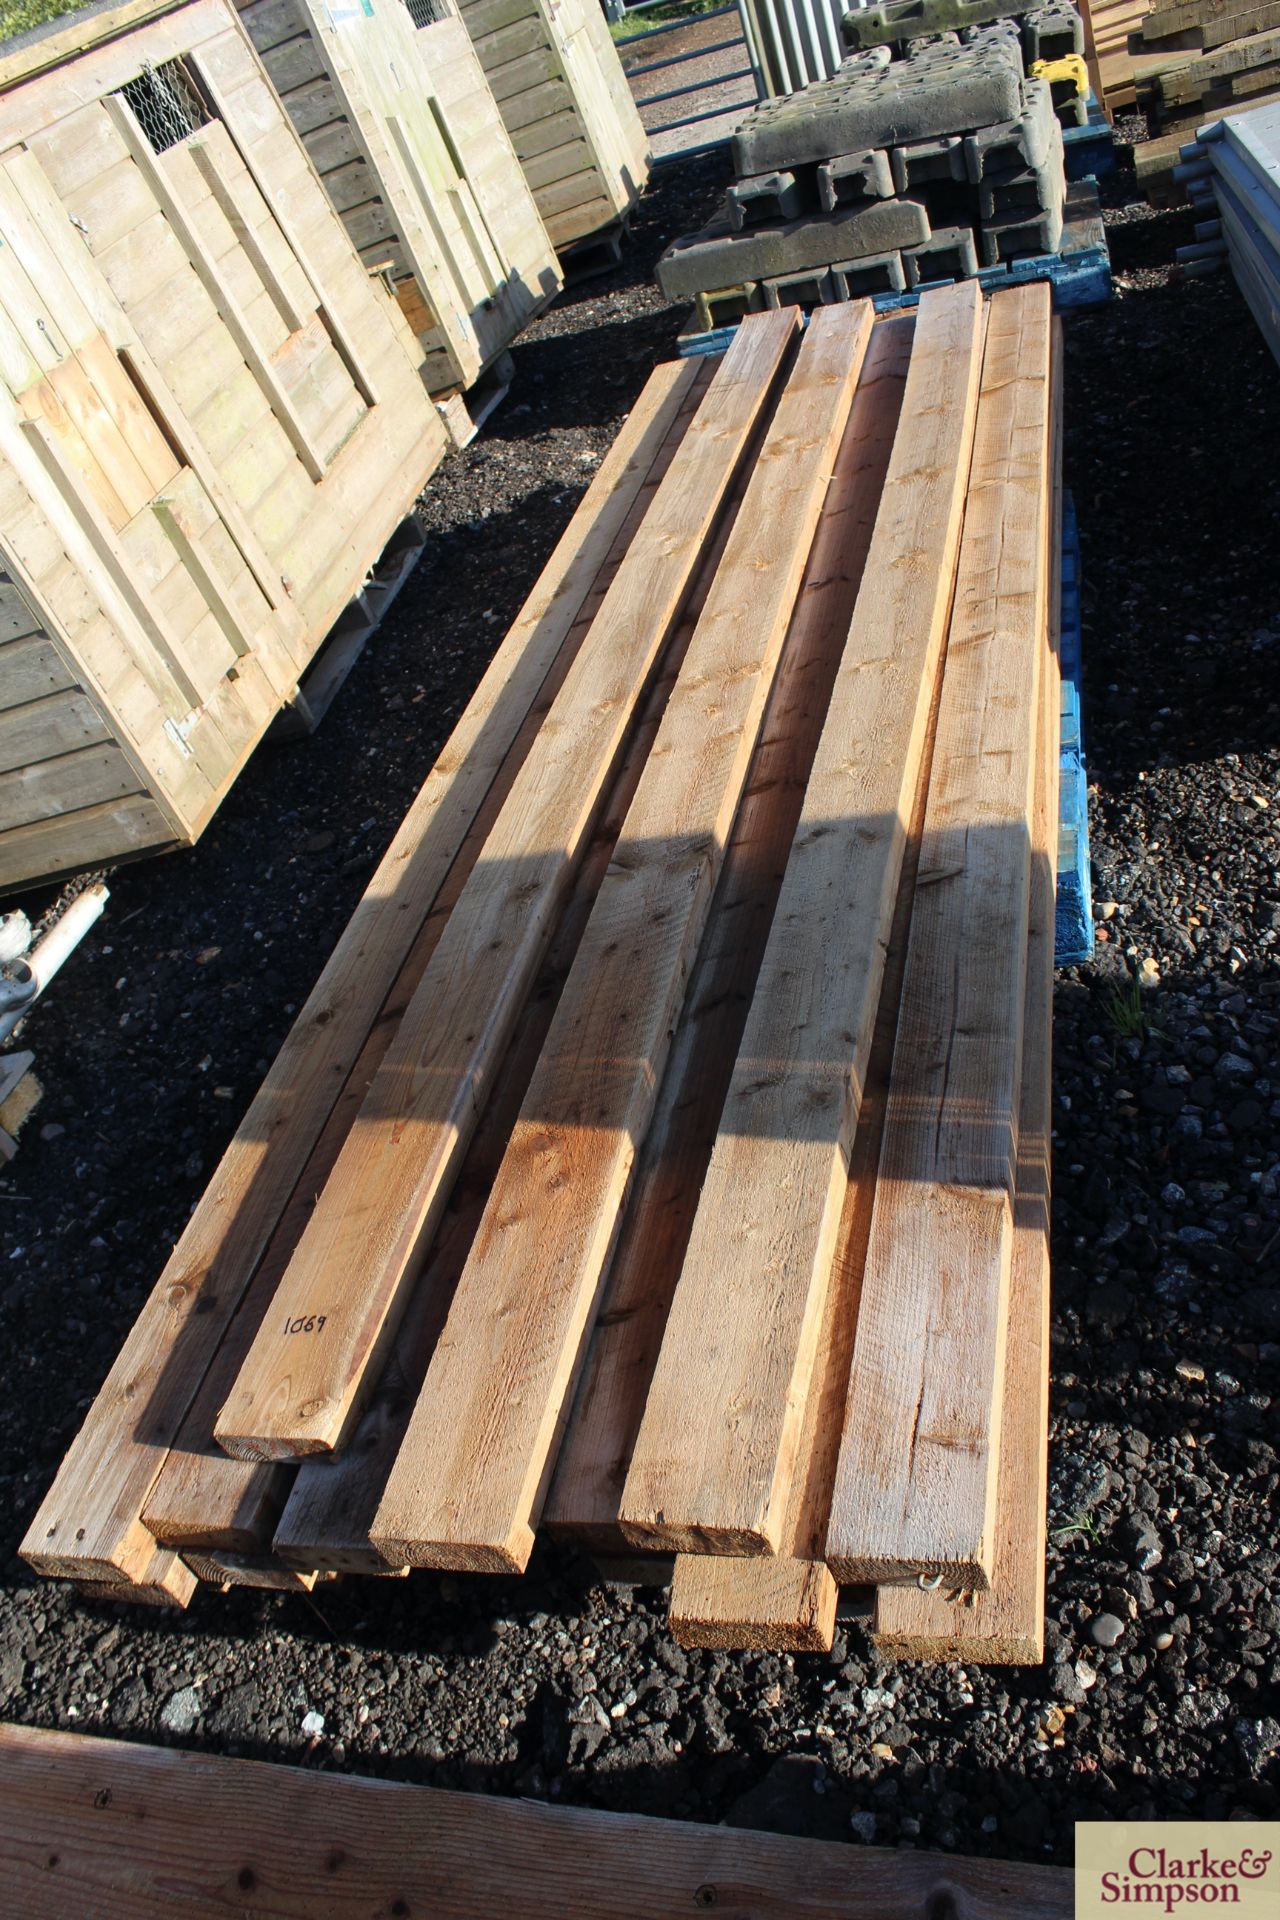 24x 10ft 5inx2in second-hand timber. V